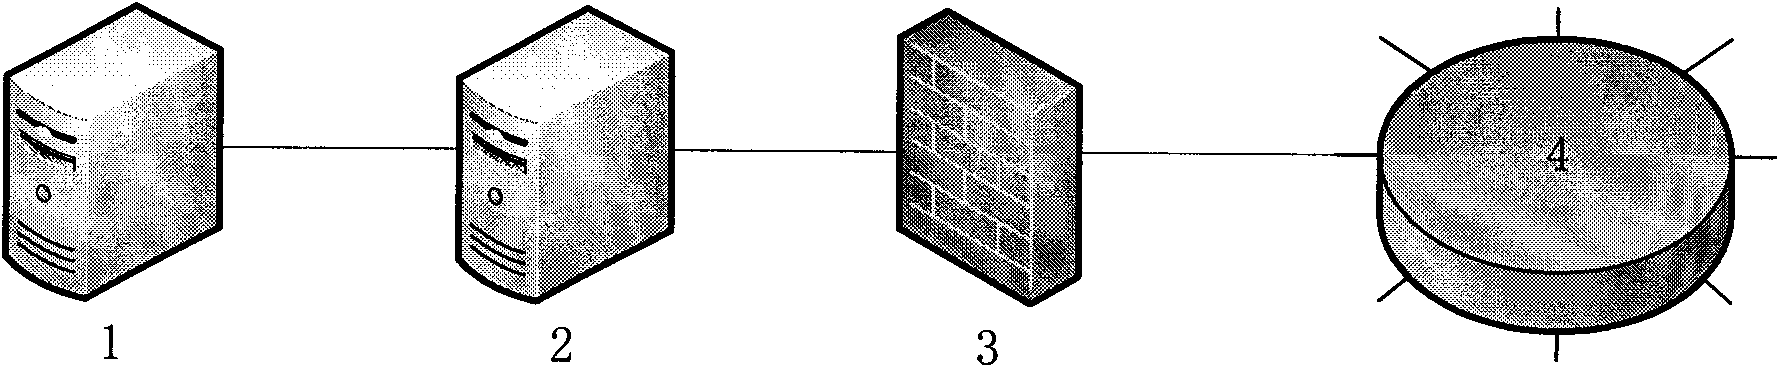 Method for vertical search and mining processing of network information